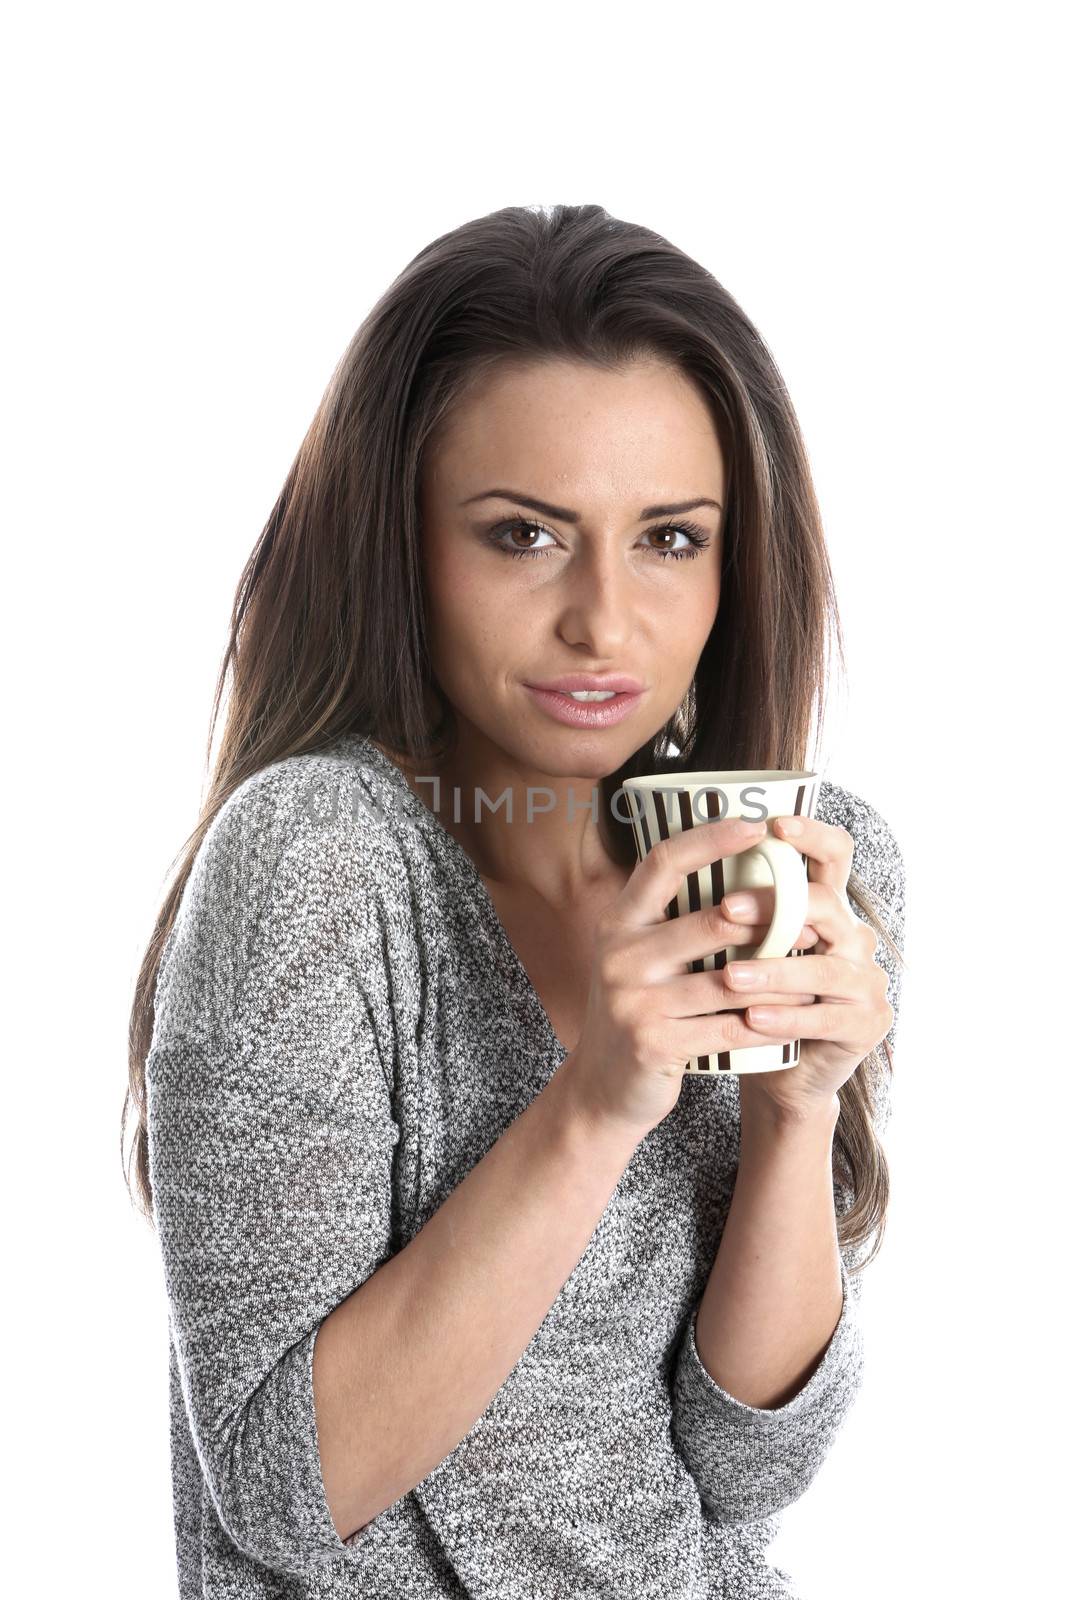 Model Released. Woman Drinking a Mug of Tea by Whiteboxmedia